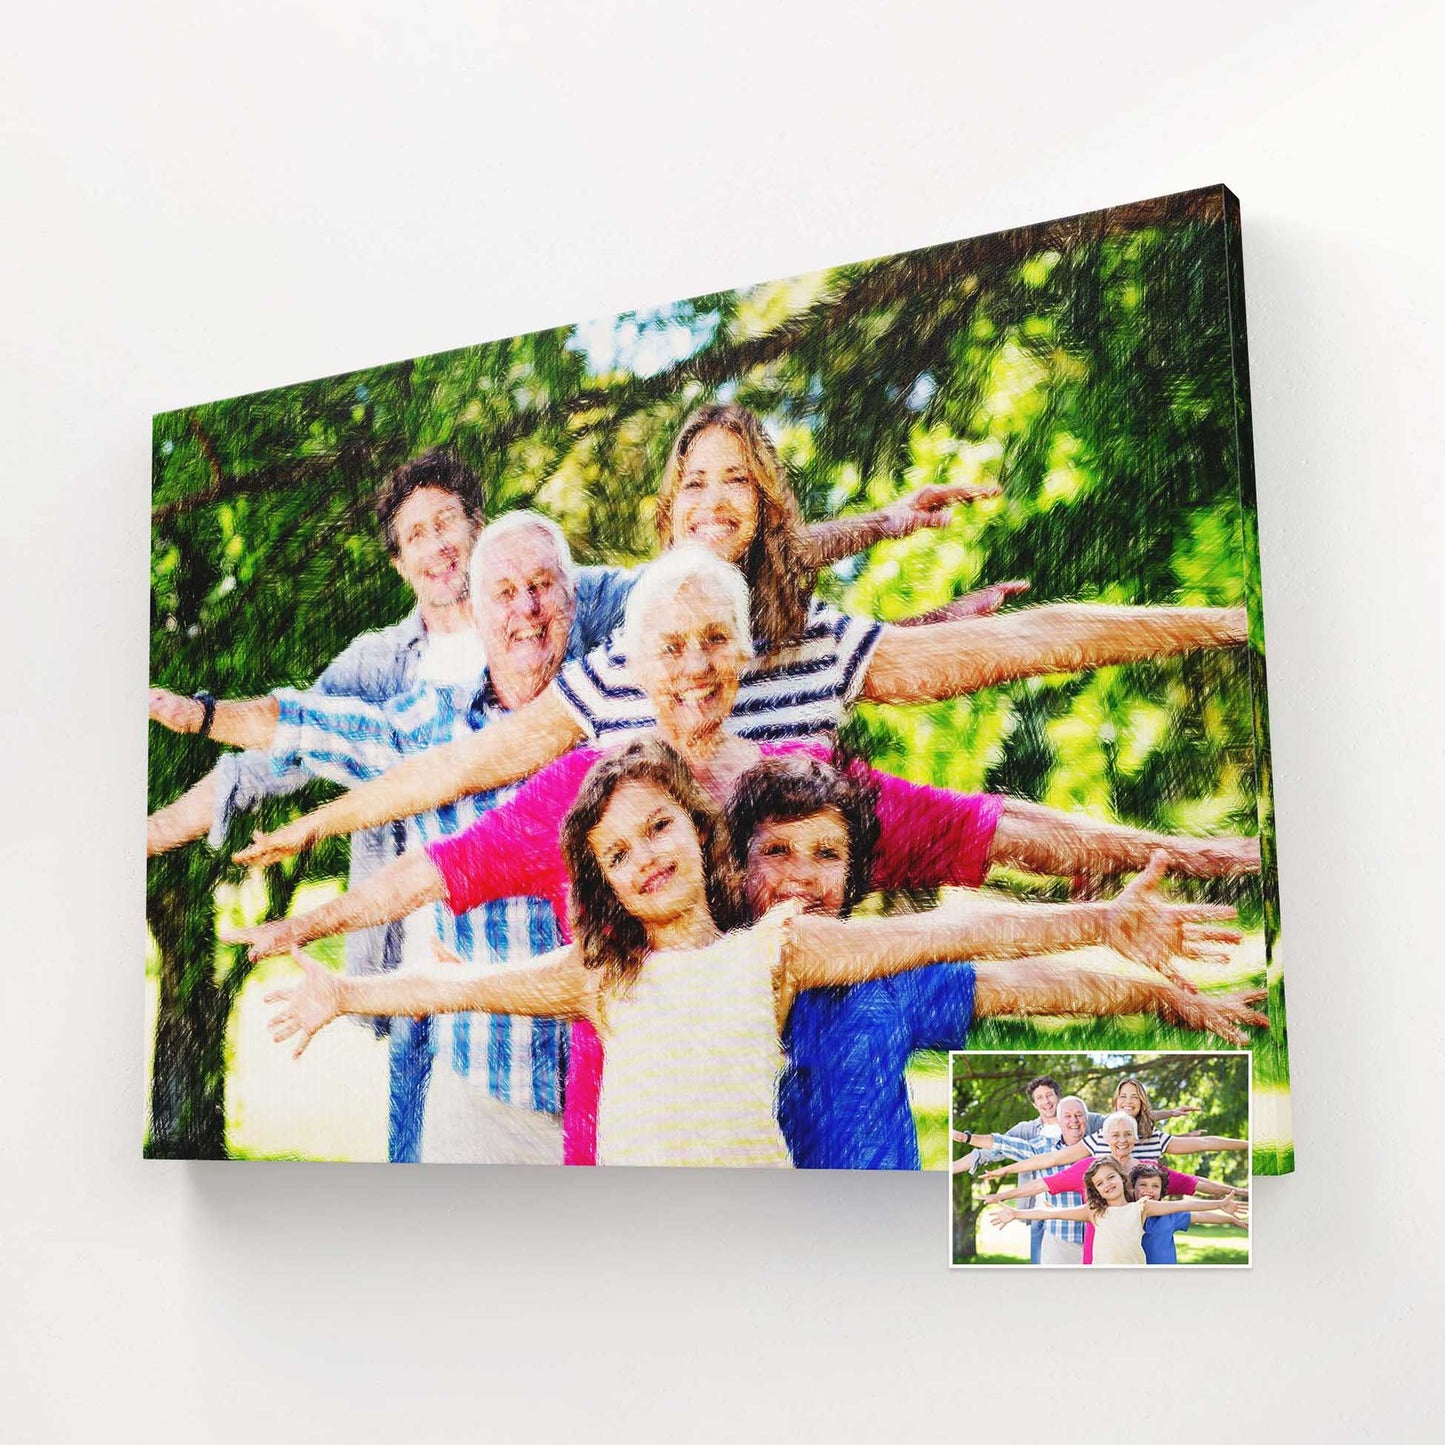 Transform your favorite memories into stunning works of art with our Personalised Colour Drawing Canvas. Our talented artists meticulously recreate your photos, capturing every detail with their creative flair